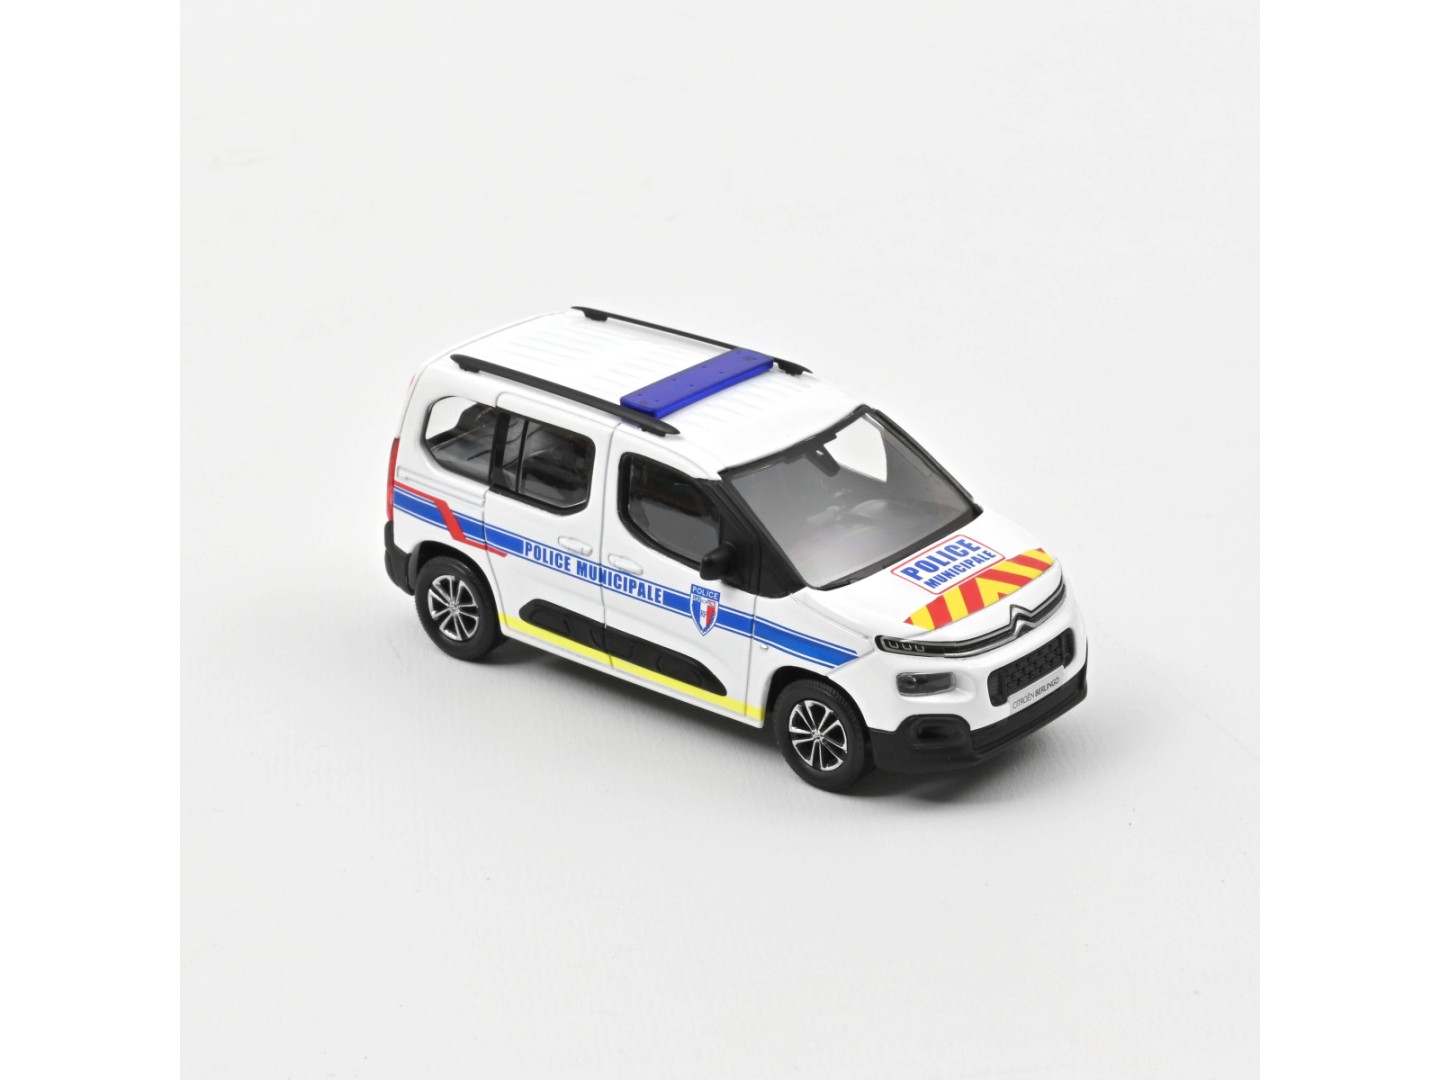 Marketplace : Citroën Berlingo 2020 Police Municipale with striping - Norev - 1:43